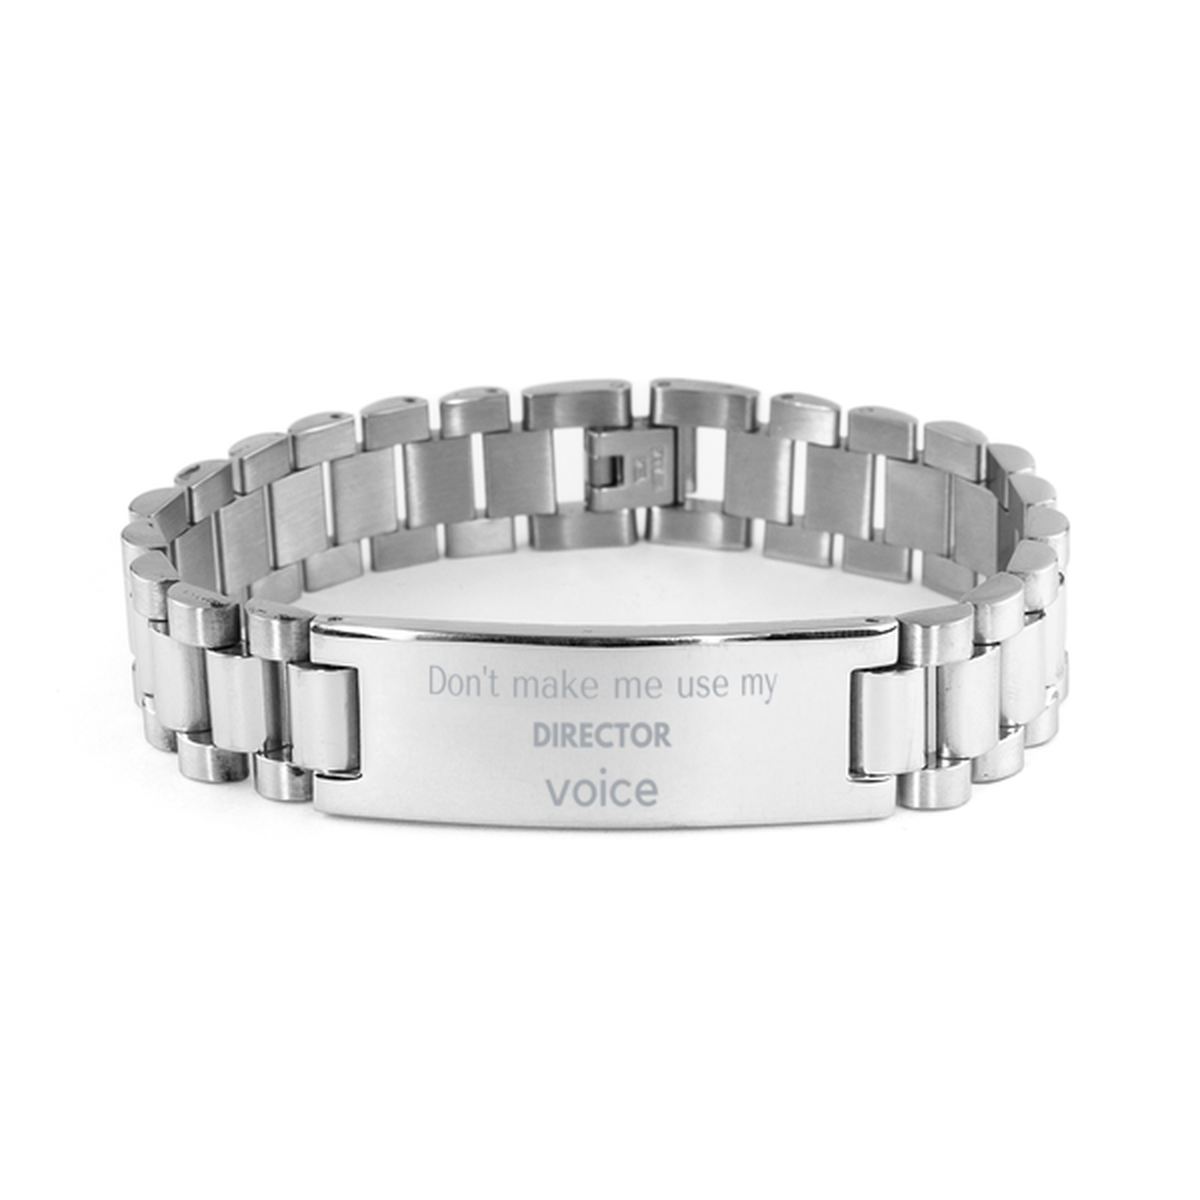 Don't make me use my Director voice, Sarcasm Director Gifts, Christmas Director Ladder Stainless Steel Bracelet Birthday Unique Gifts For Director Coworkers, Men, Women, Colleague, Friends